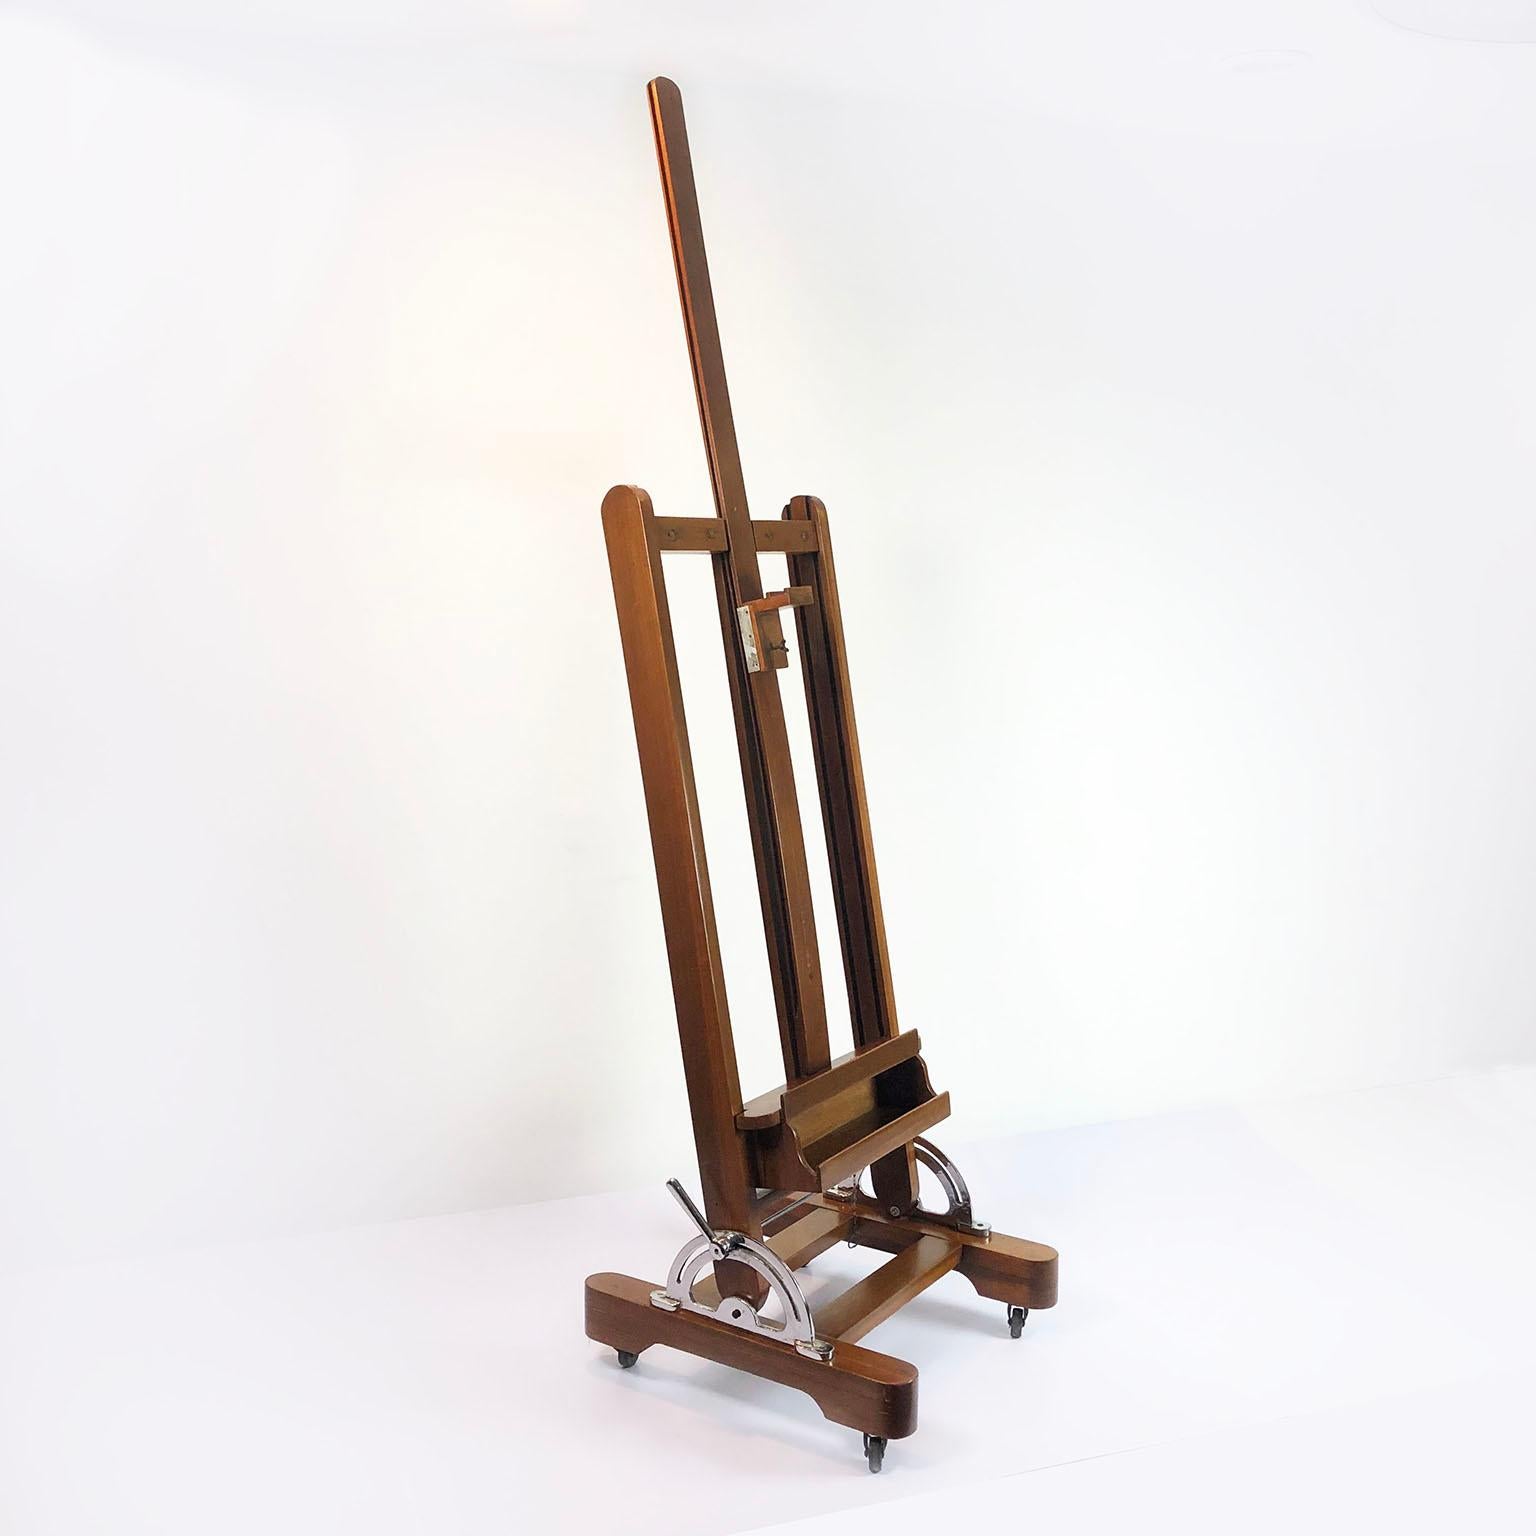 We offer this Mexican wooden adjustable artist easel, circa 1950. This easel has the same design as those currently in the study of Diego Rivera and Frida Kahlo with 4 wheels, recently restored, ready for the next Frida Kahlo! Height is adjustable.